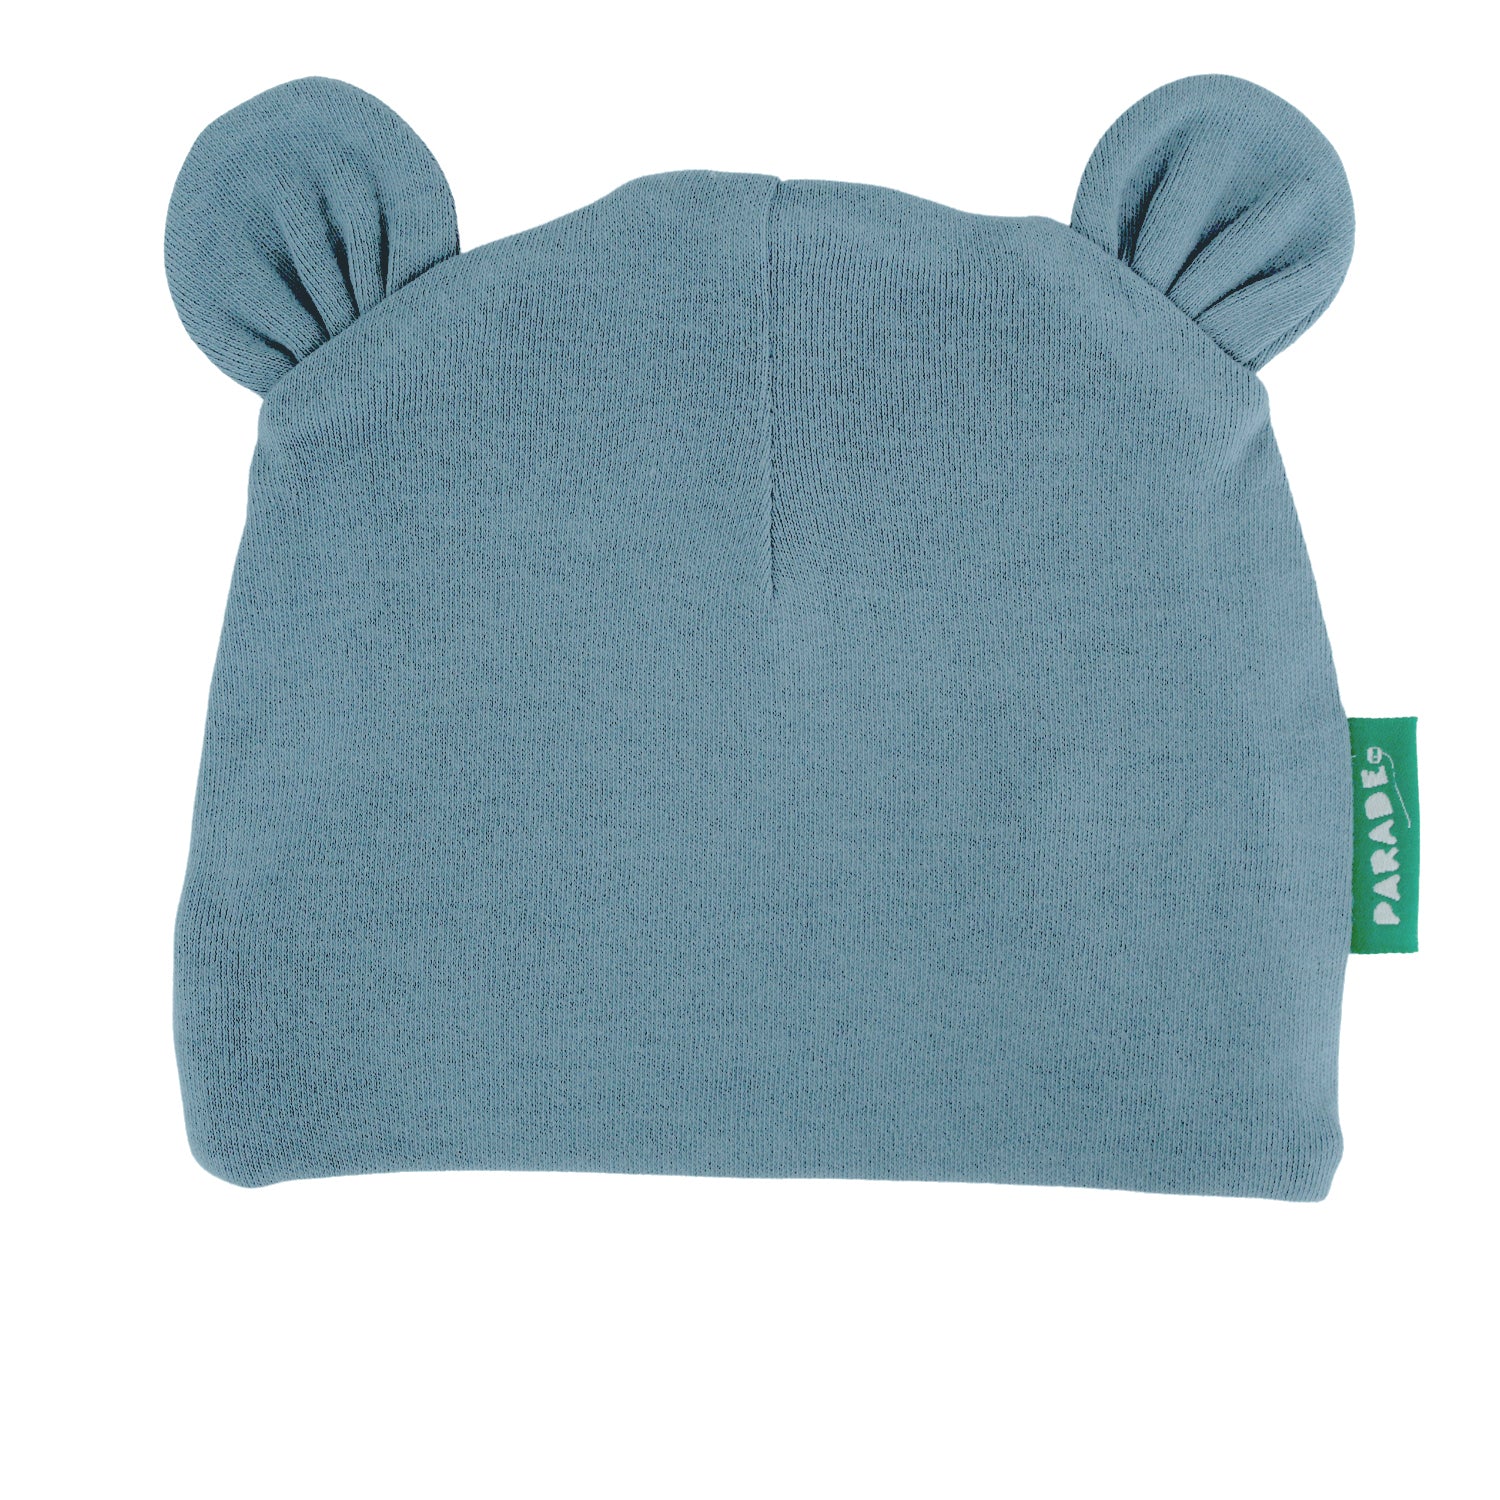 Tender Topper Organic Green Blue Berry Hat madin the us in organic cotton –  Bootyland Kids